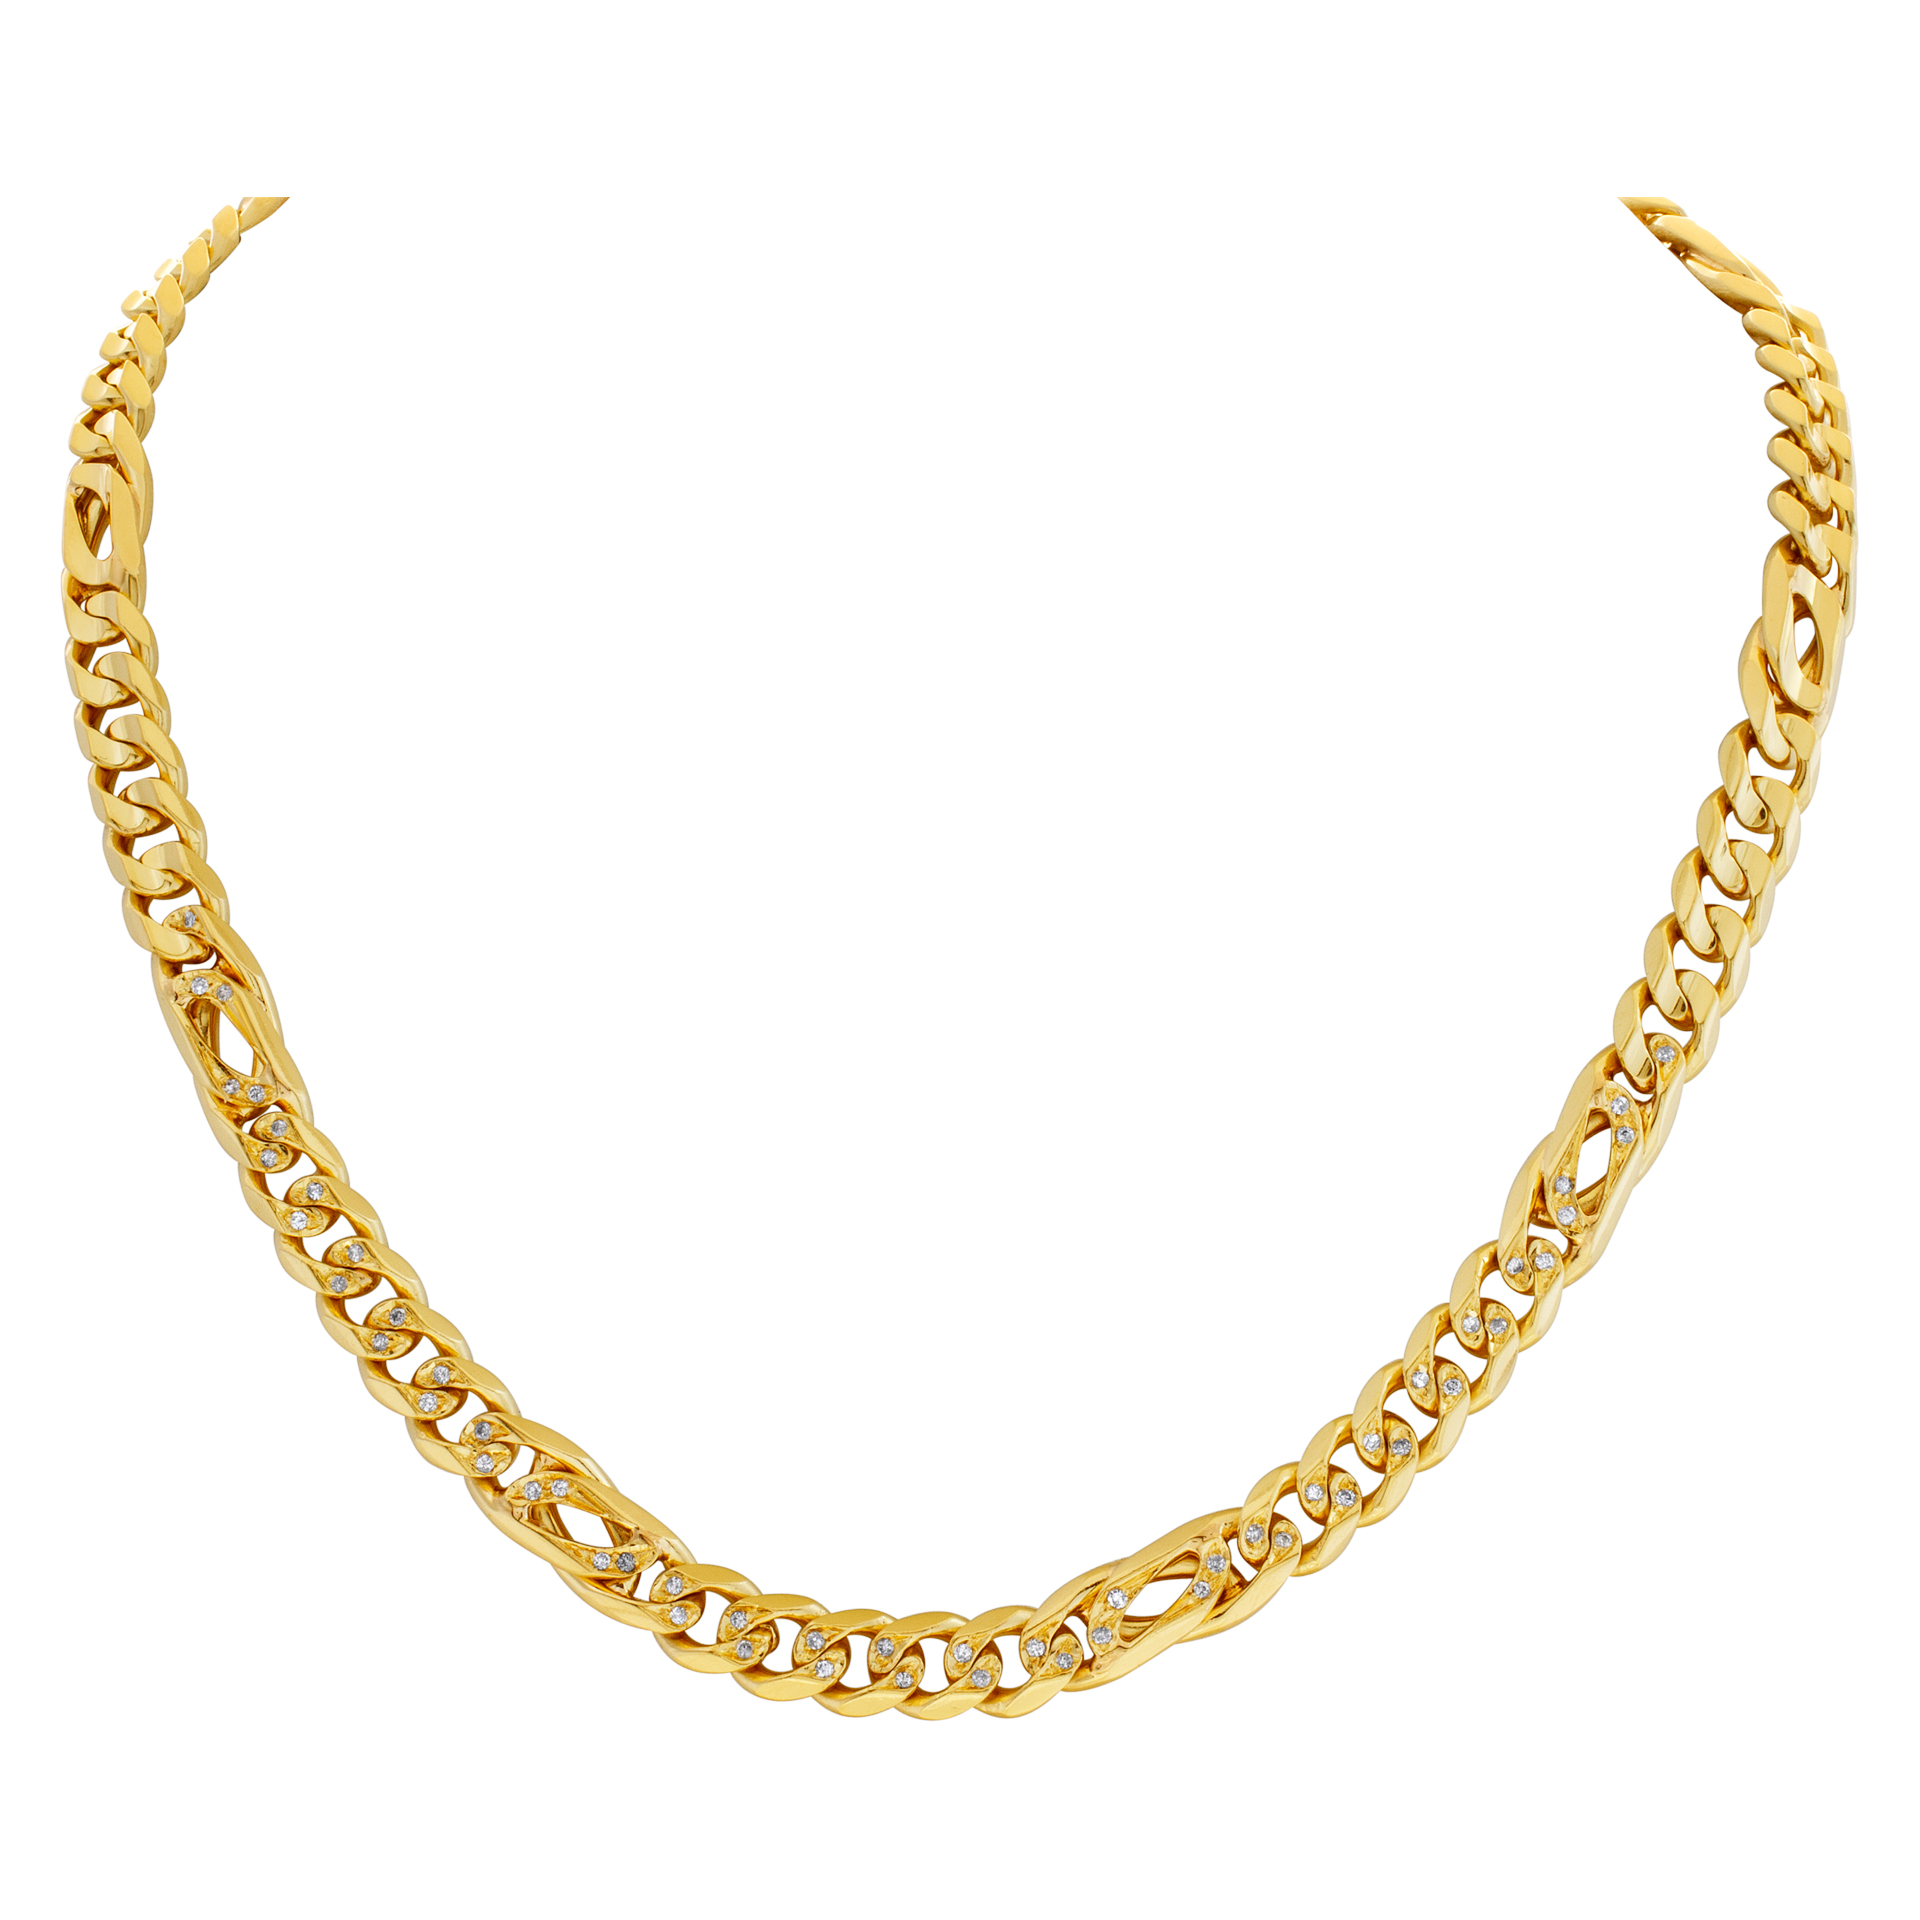 Solid chain necklace in 18k gold, and  approximately 0.50 carat round brilliant cut diamonds image 1